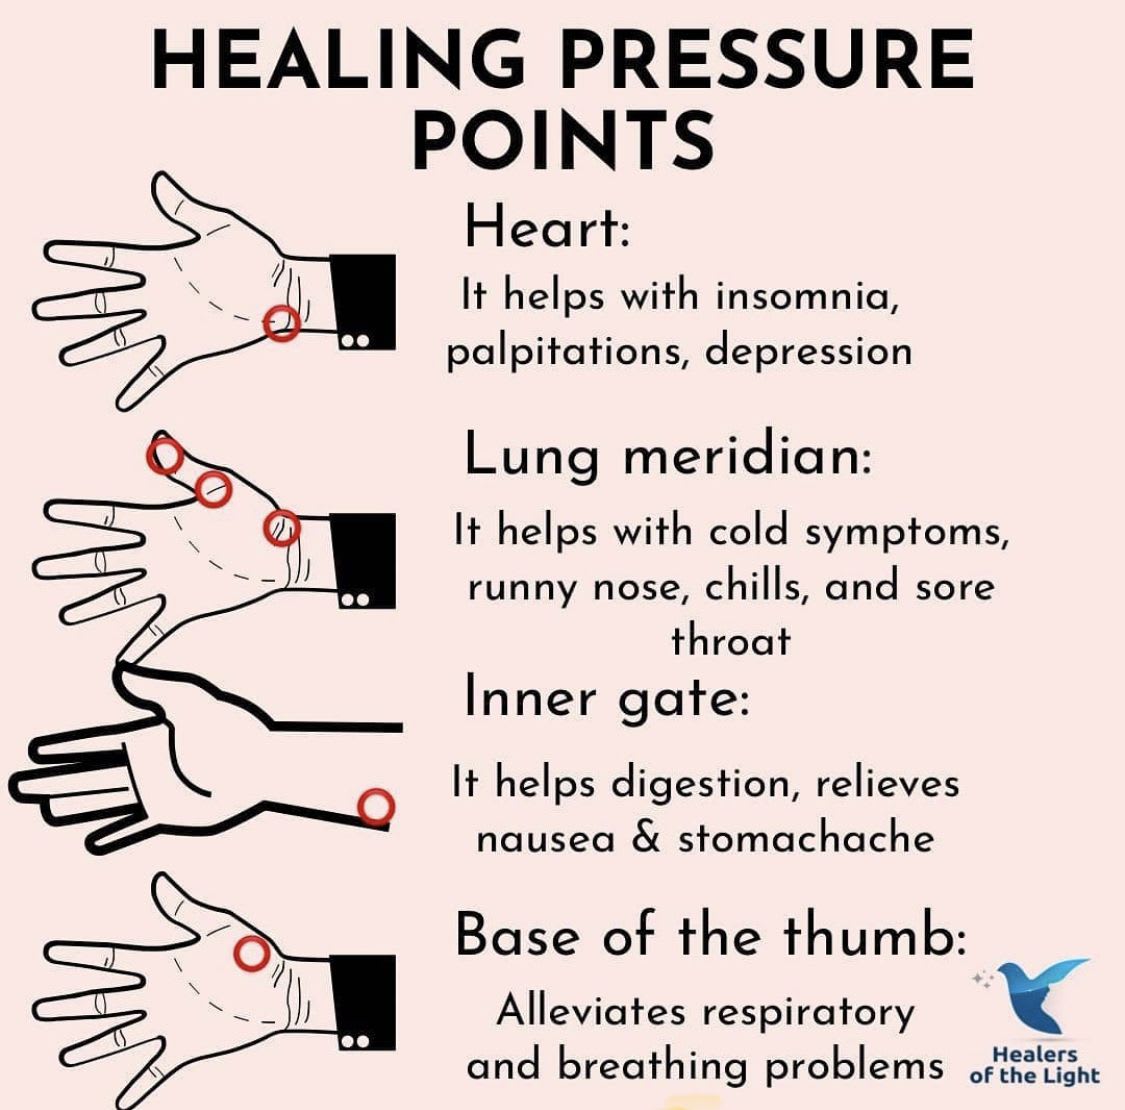 Pin by Evol on more pearls | Reflexology pressure points, Pressure point therapy, Healing reflexology